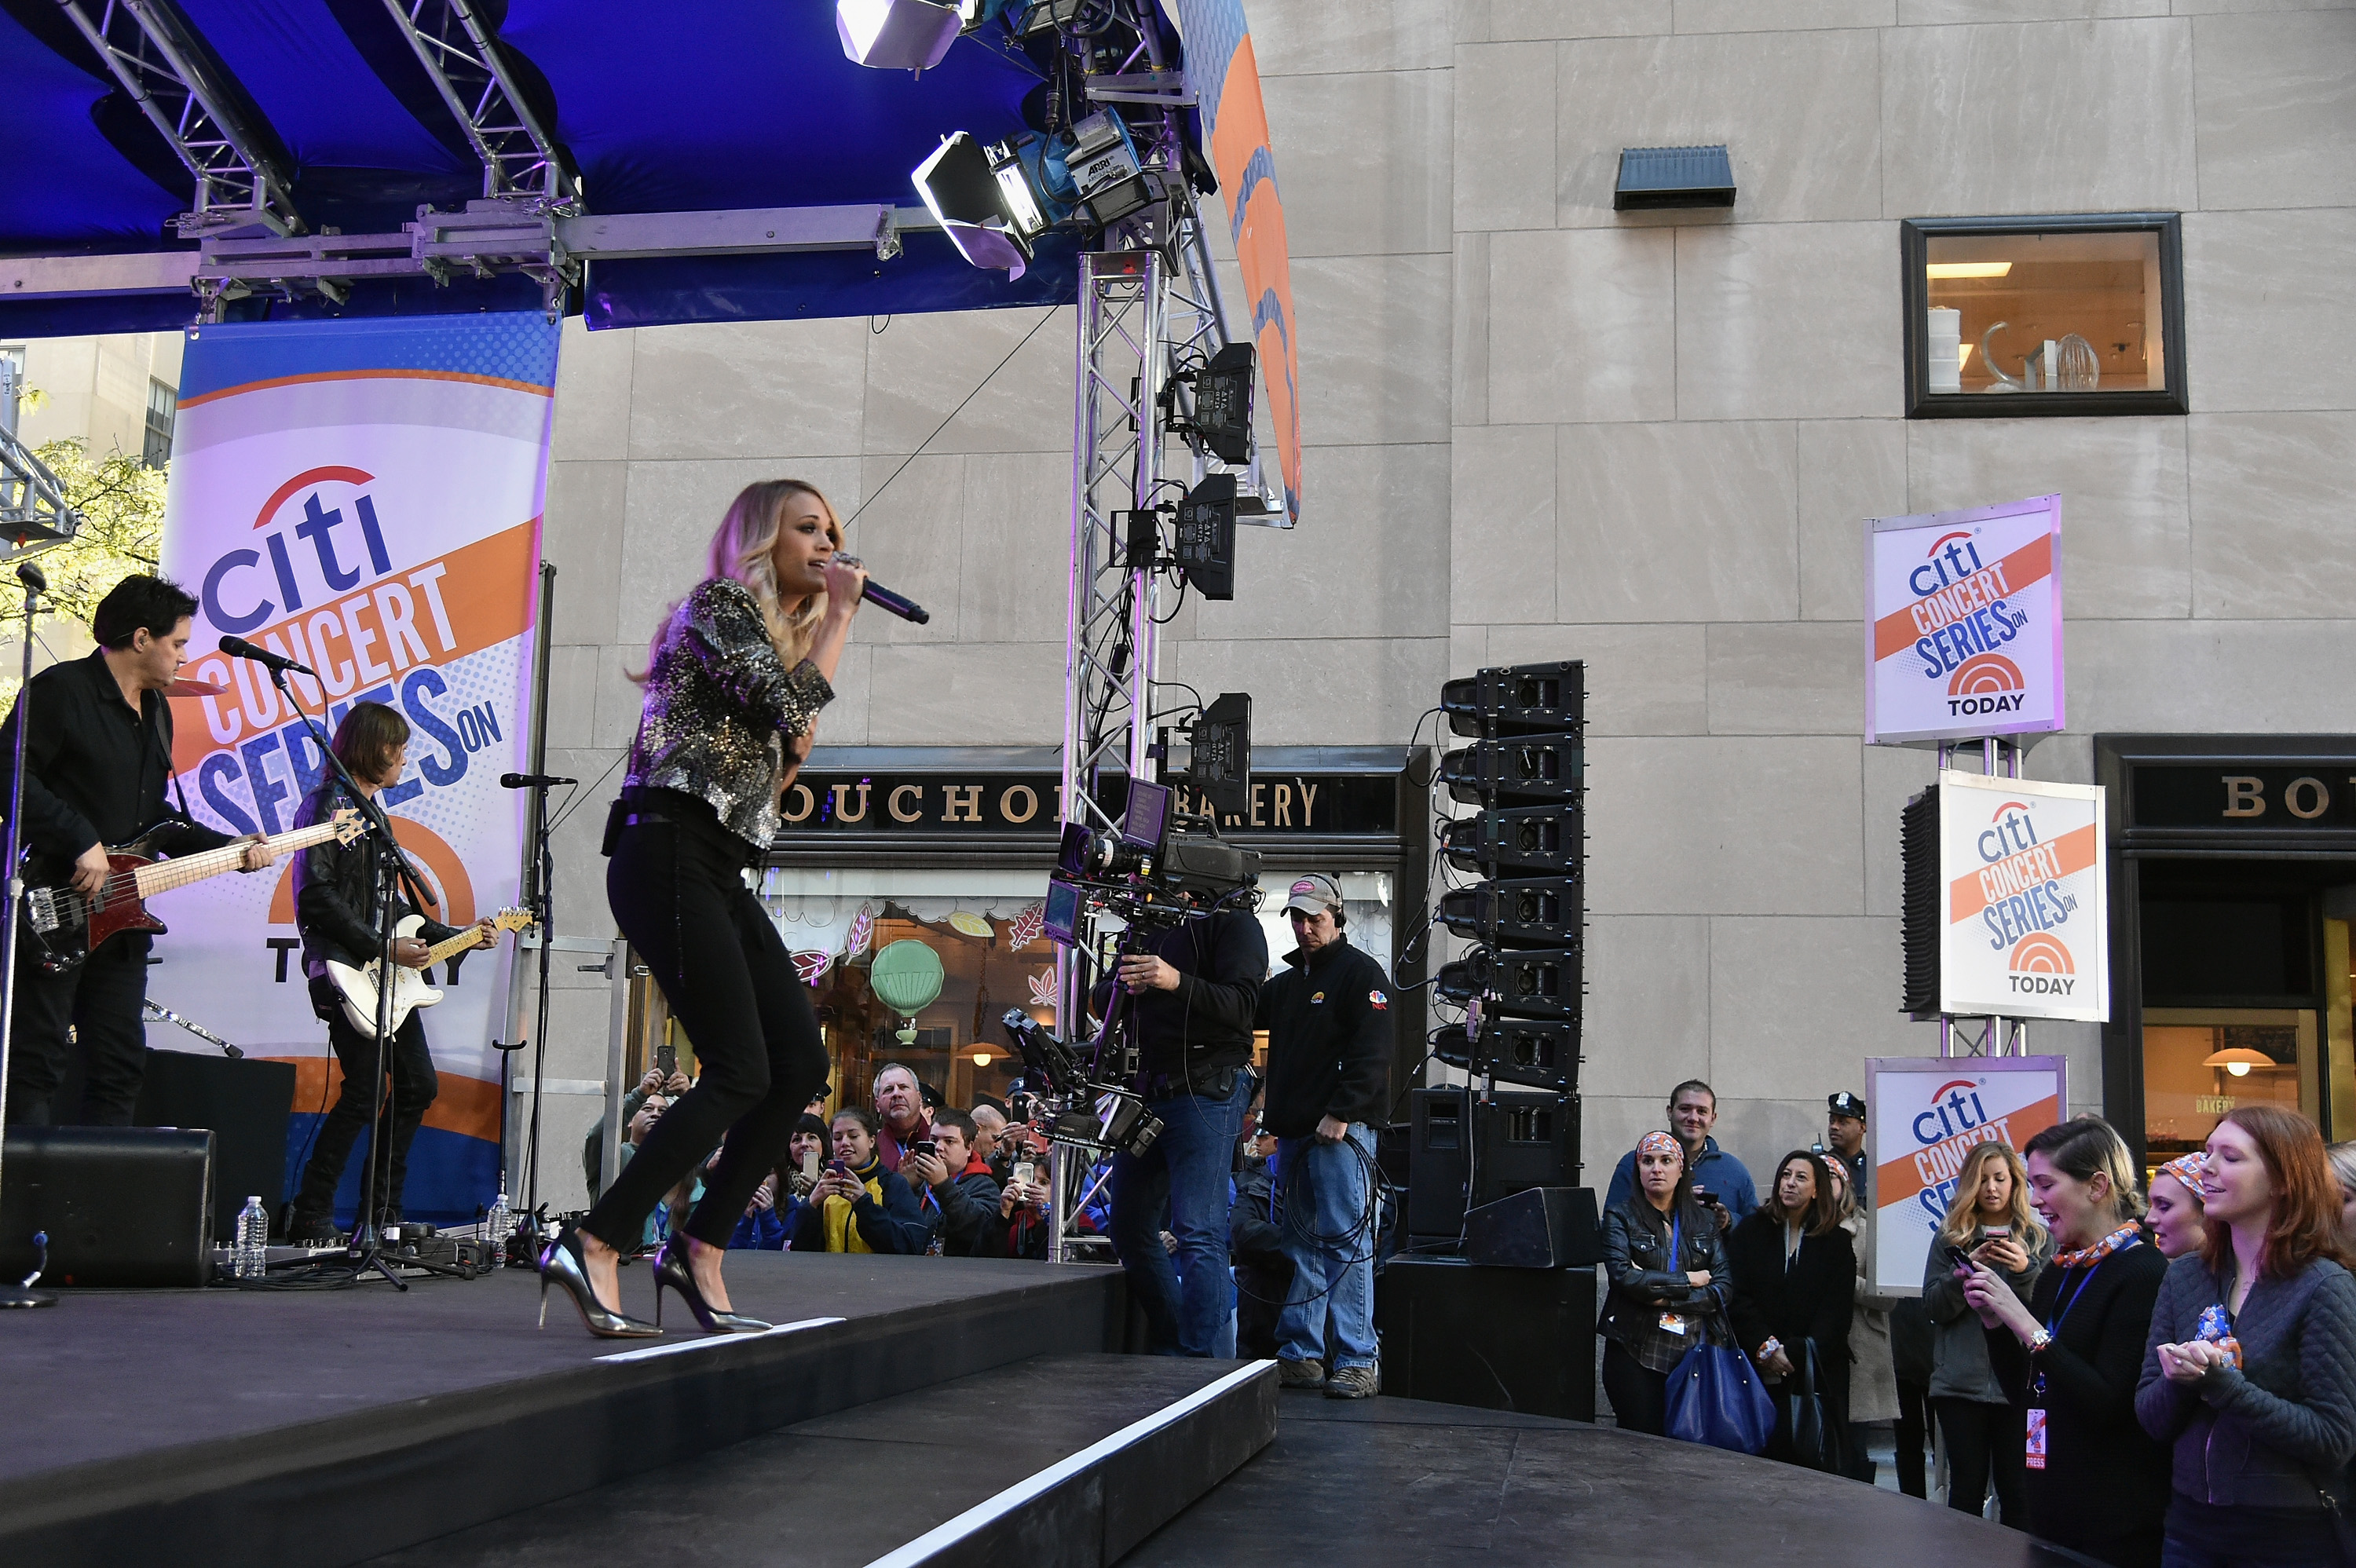 Carrie Underwood's Performance On The Citi Concert Series On Today